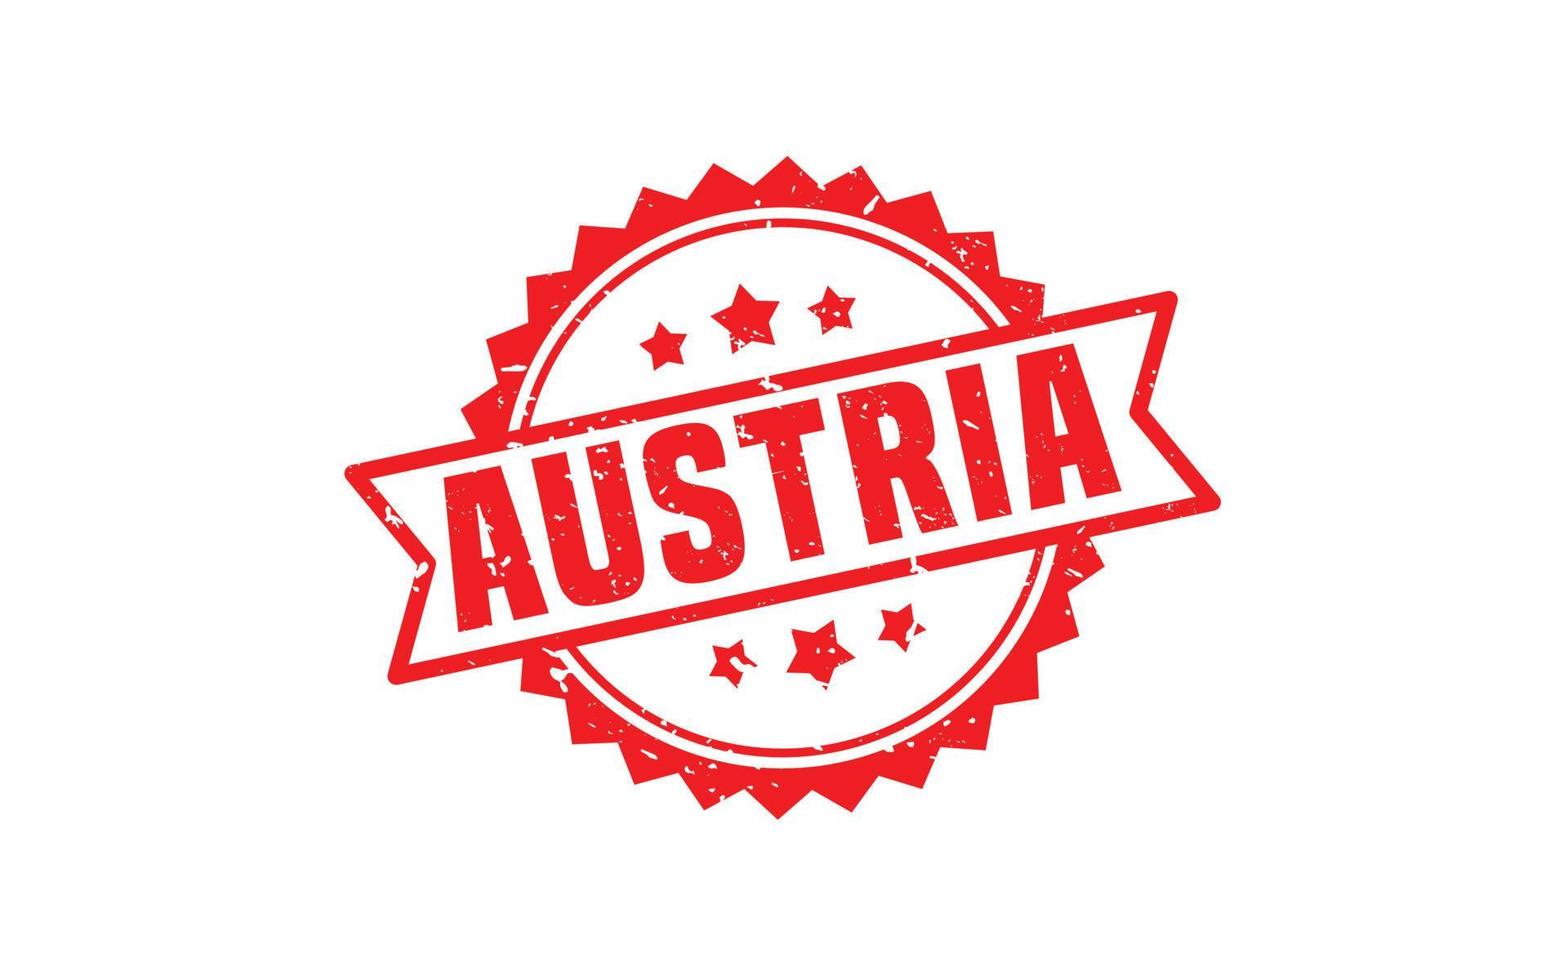 AUSTRIA stamp rubber with grunge style on white background vector